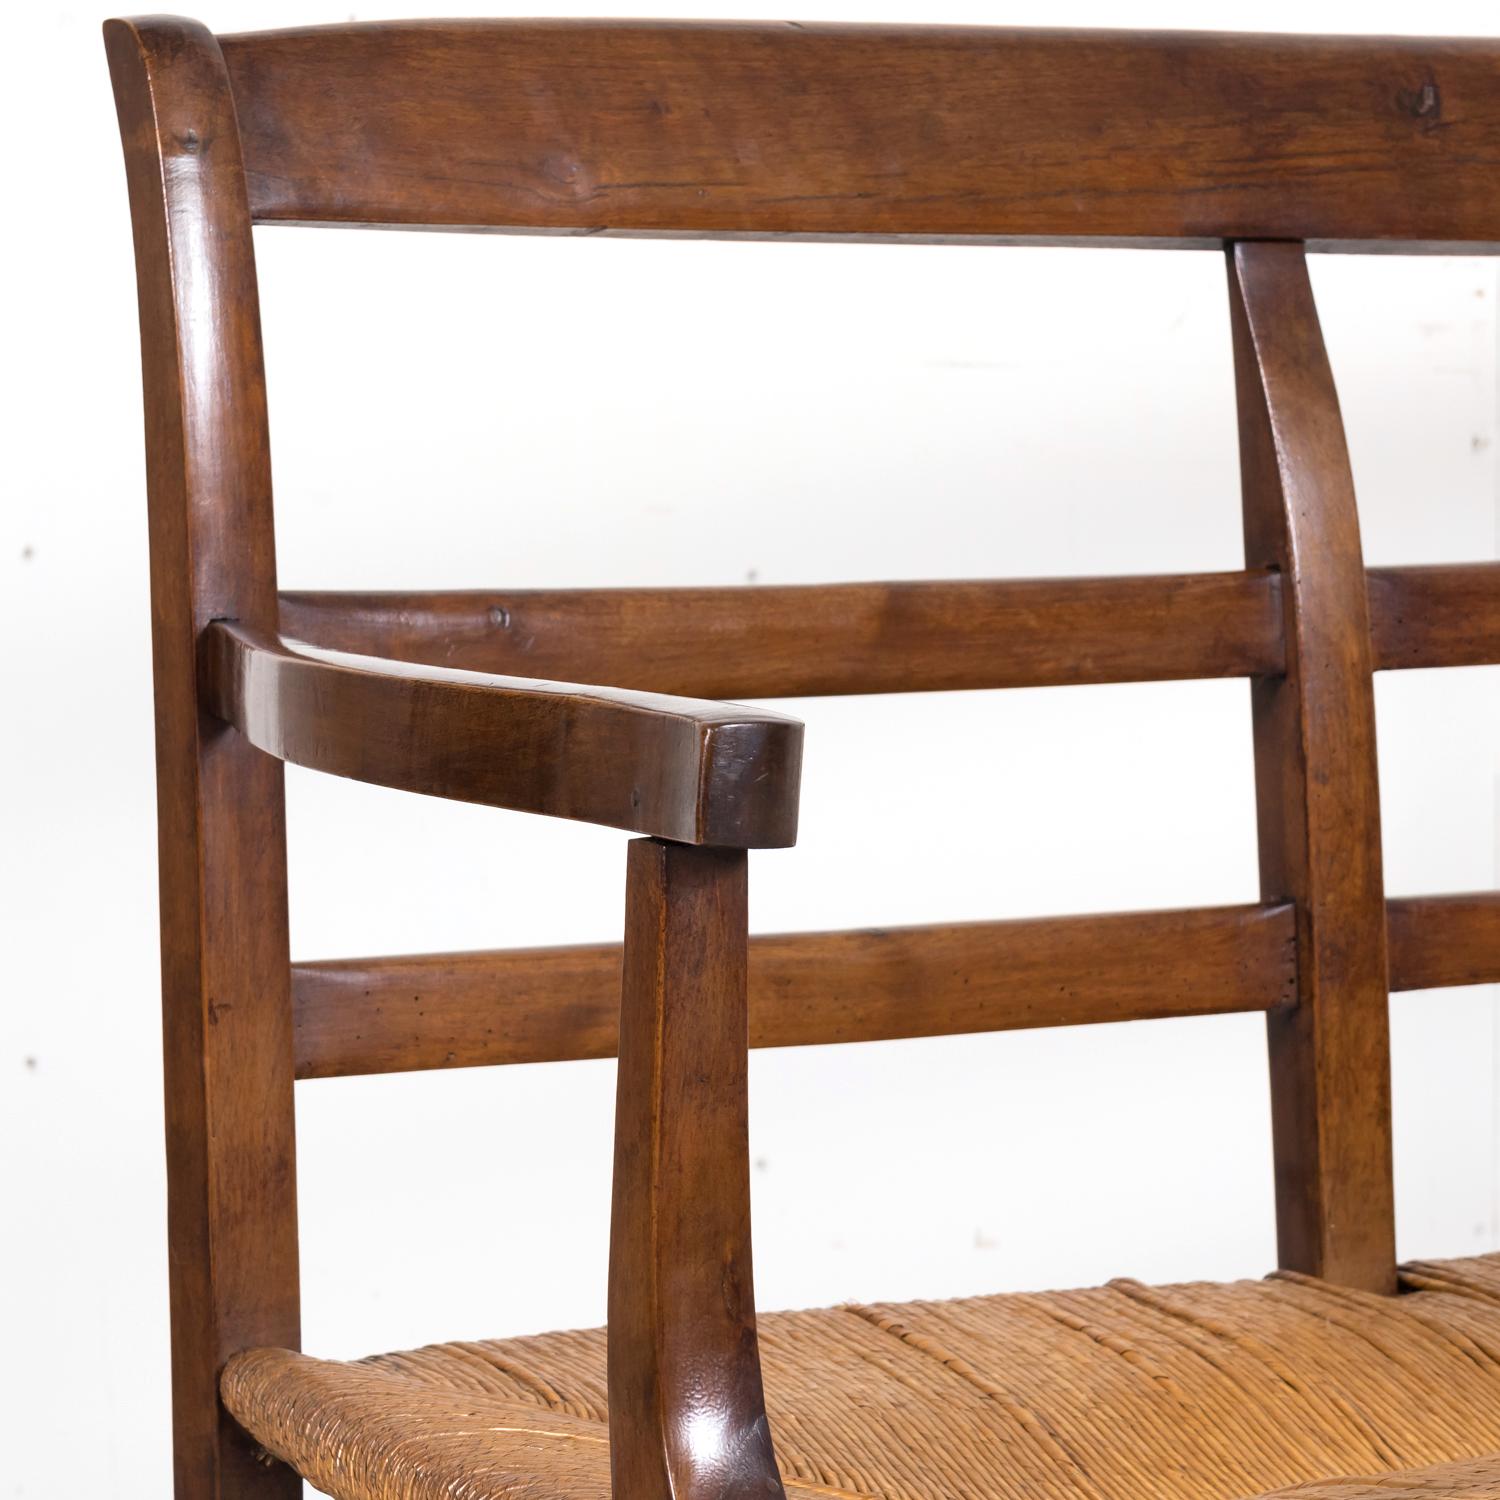 Mid-19th Century French Radassier or Ladder Back Rush Seat Bench 6